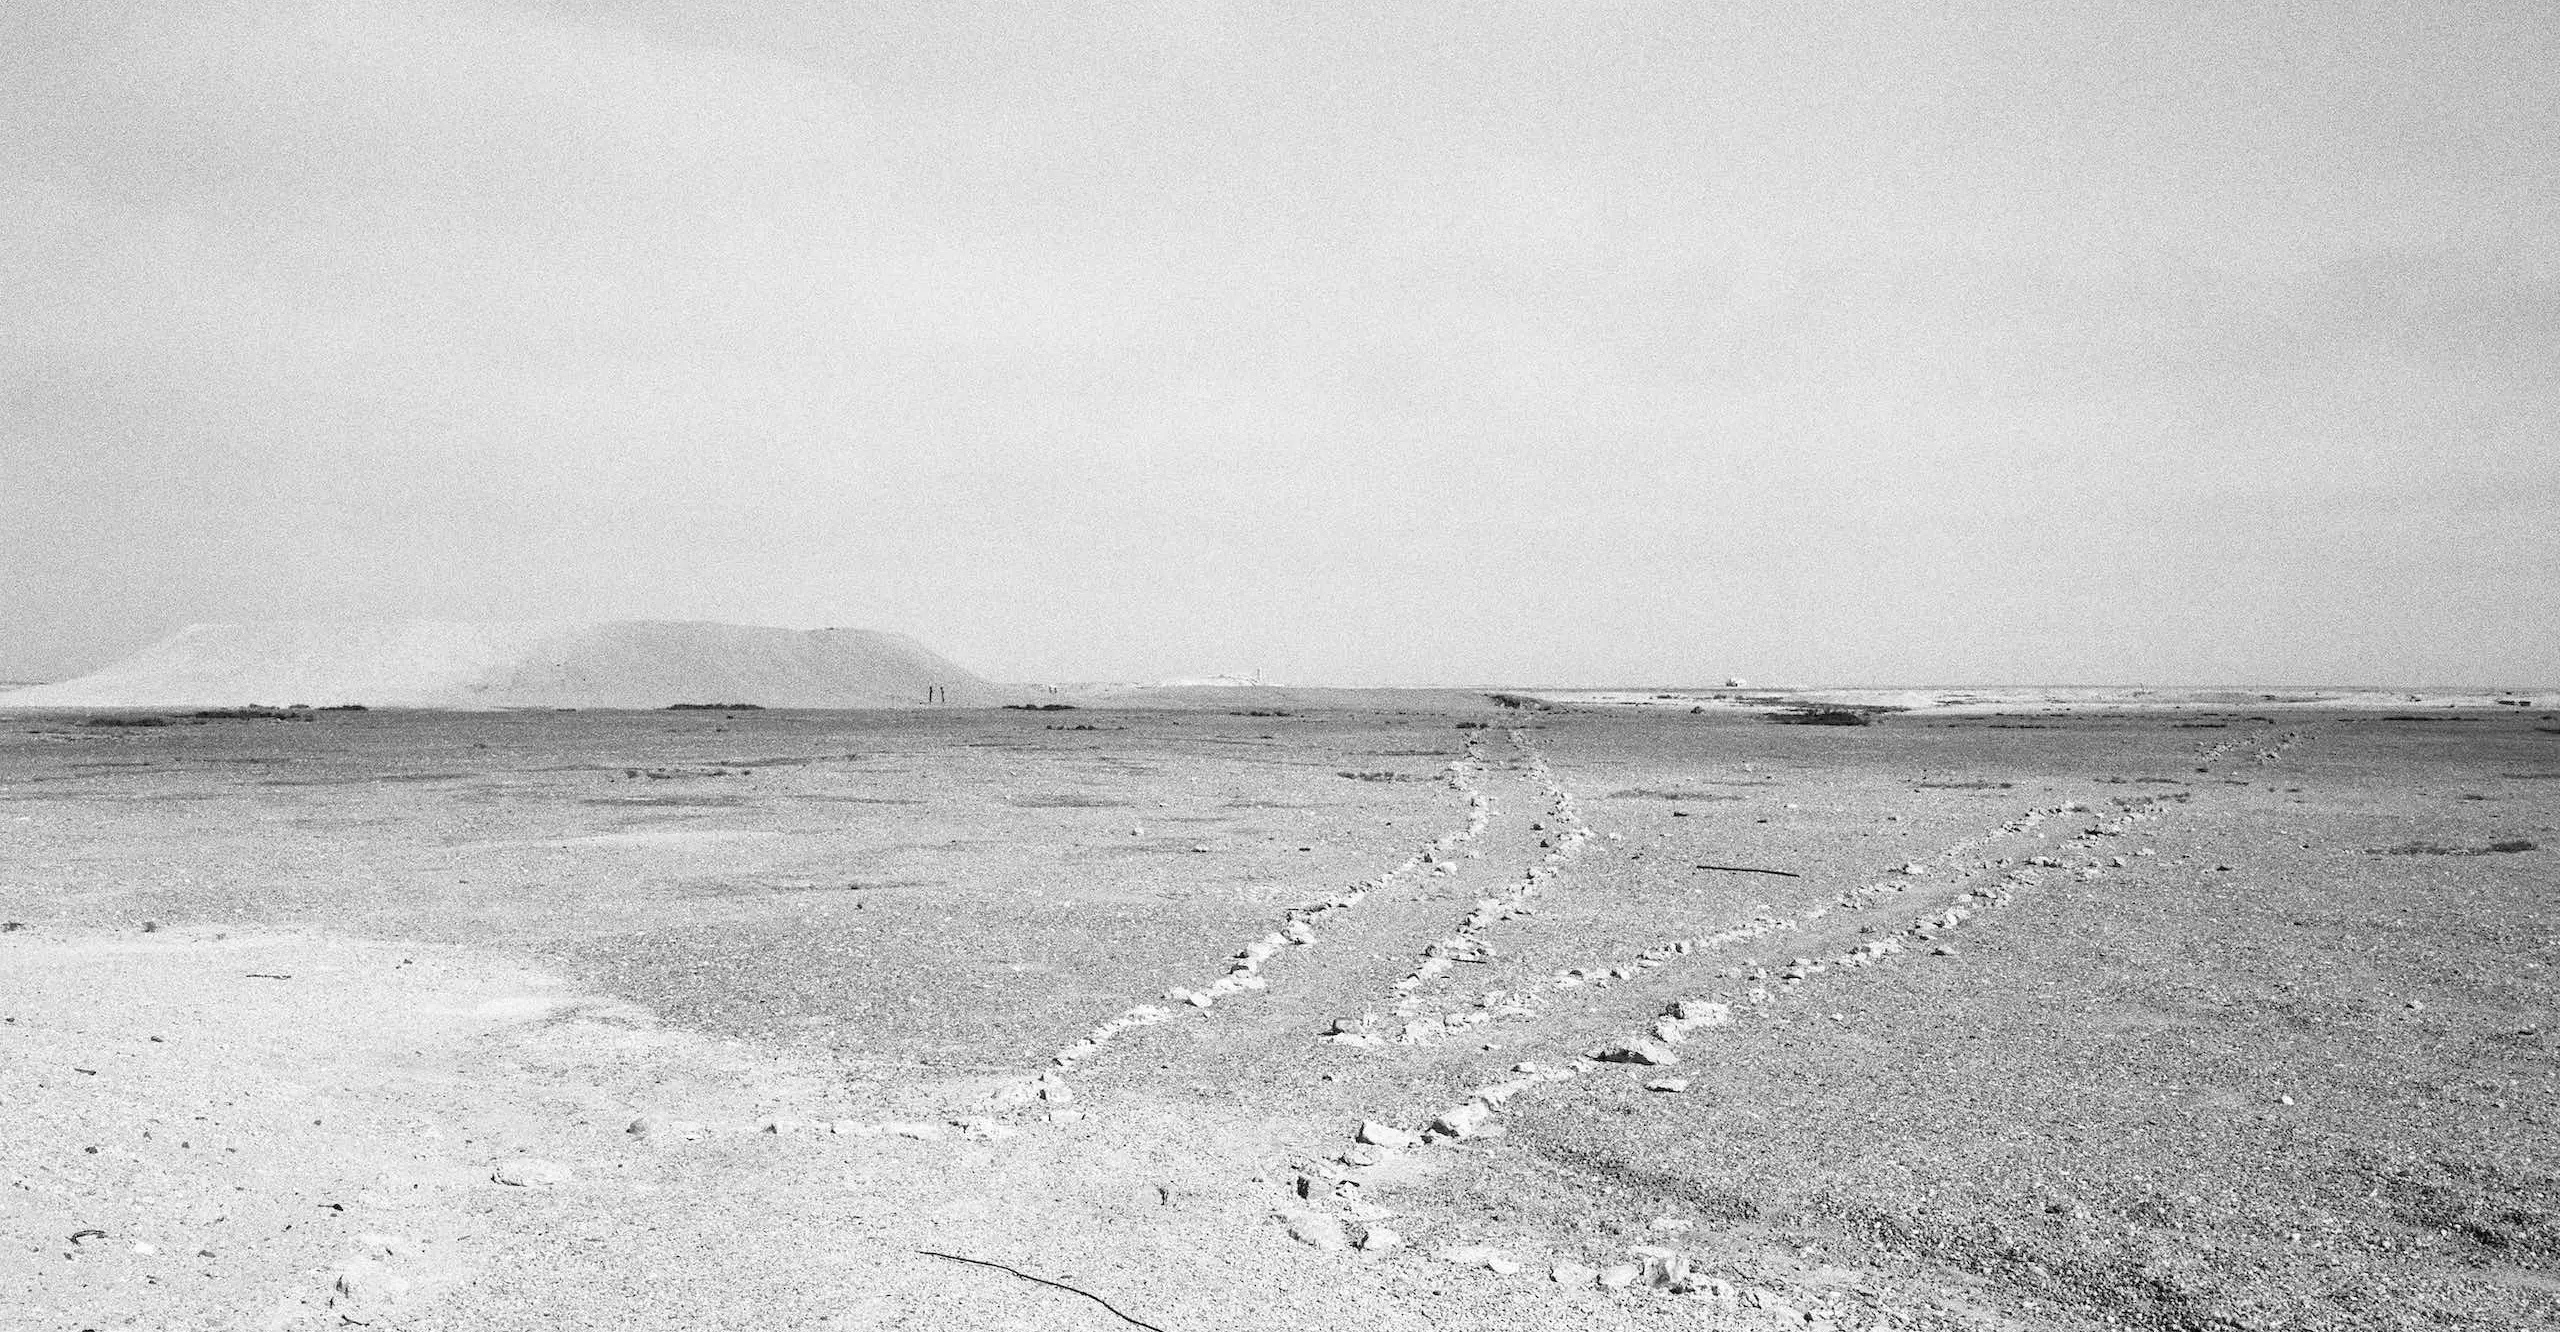 Black and white photograph of a desert landscape with two stone line paths leading off into the distance where a large crater and smaller buildings sit on the horizon.